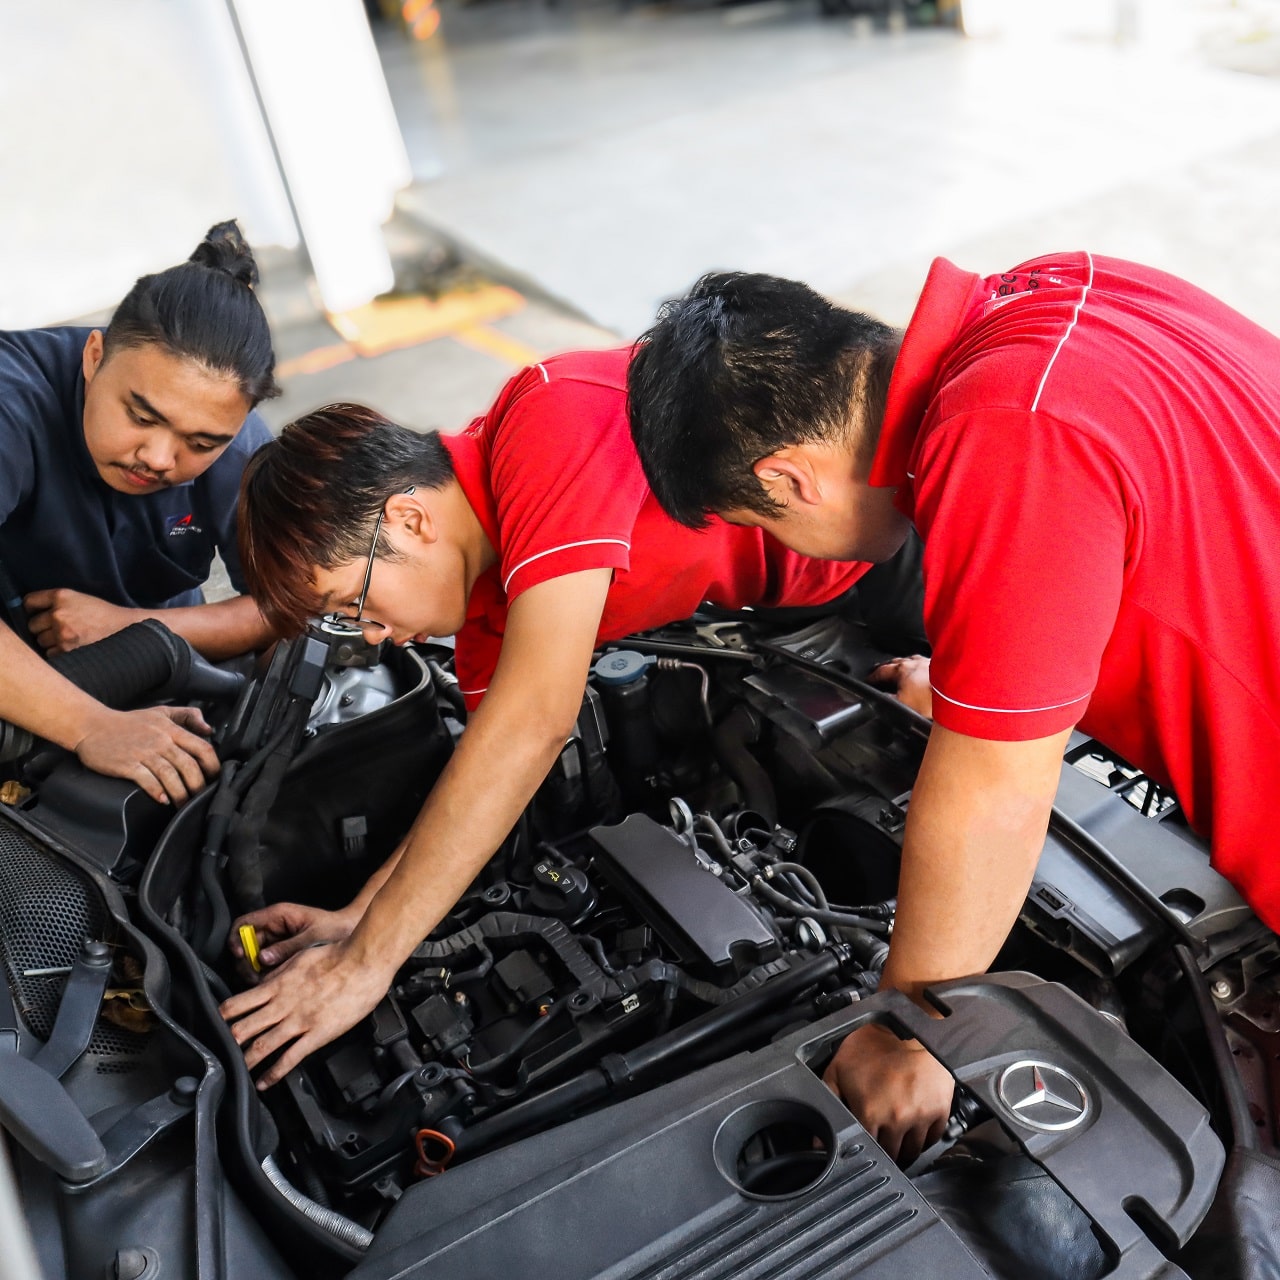 best auto mechanic school in malaysia Techtra Automotive Academy (Diploma in Automotive Technology) Best Auto College in Malaysia Kuala Lumpur) 2022-2023 Automotive Technology Academy Study Diploma in Malaysia KL Kuala Lumpur - Techtra Automotive College in Malaysia